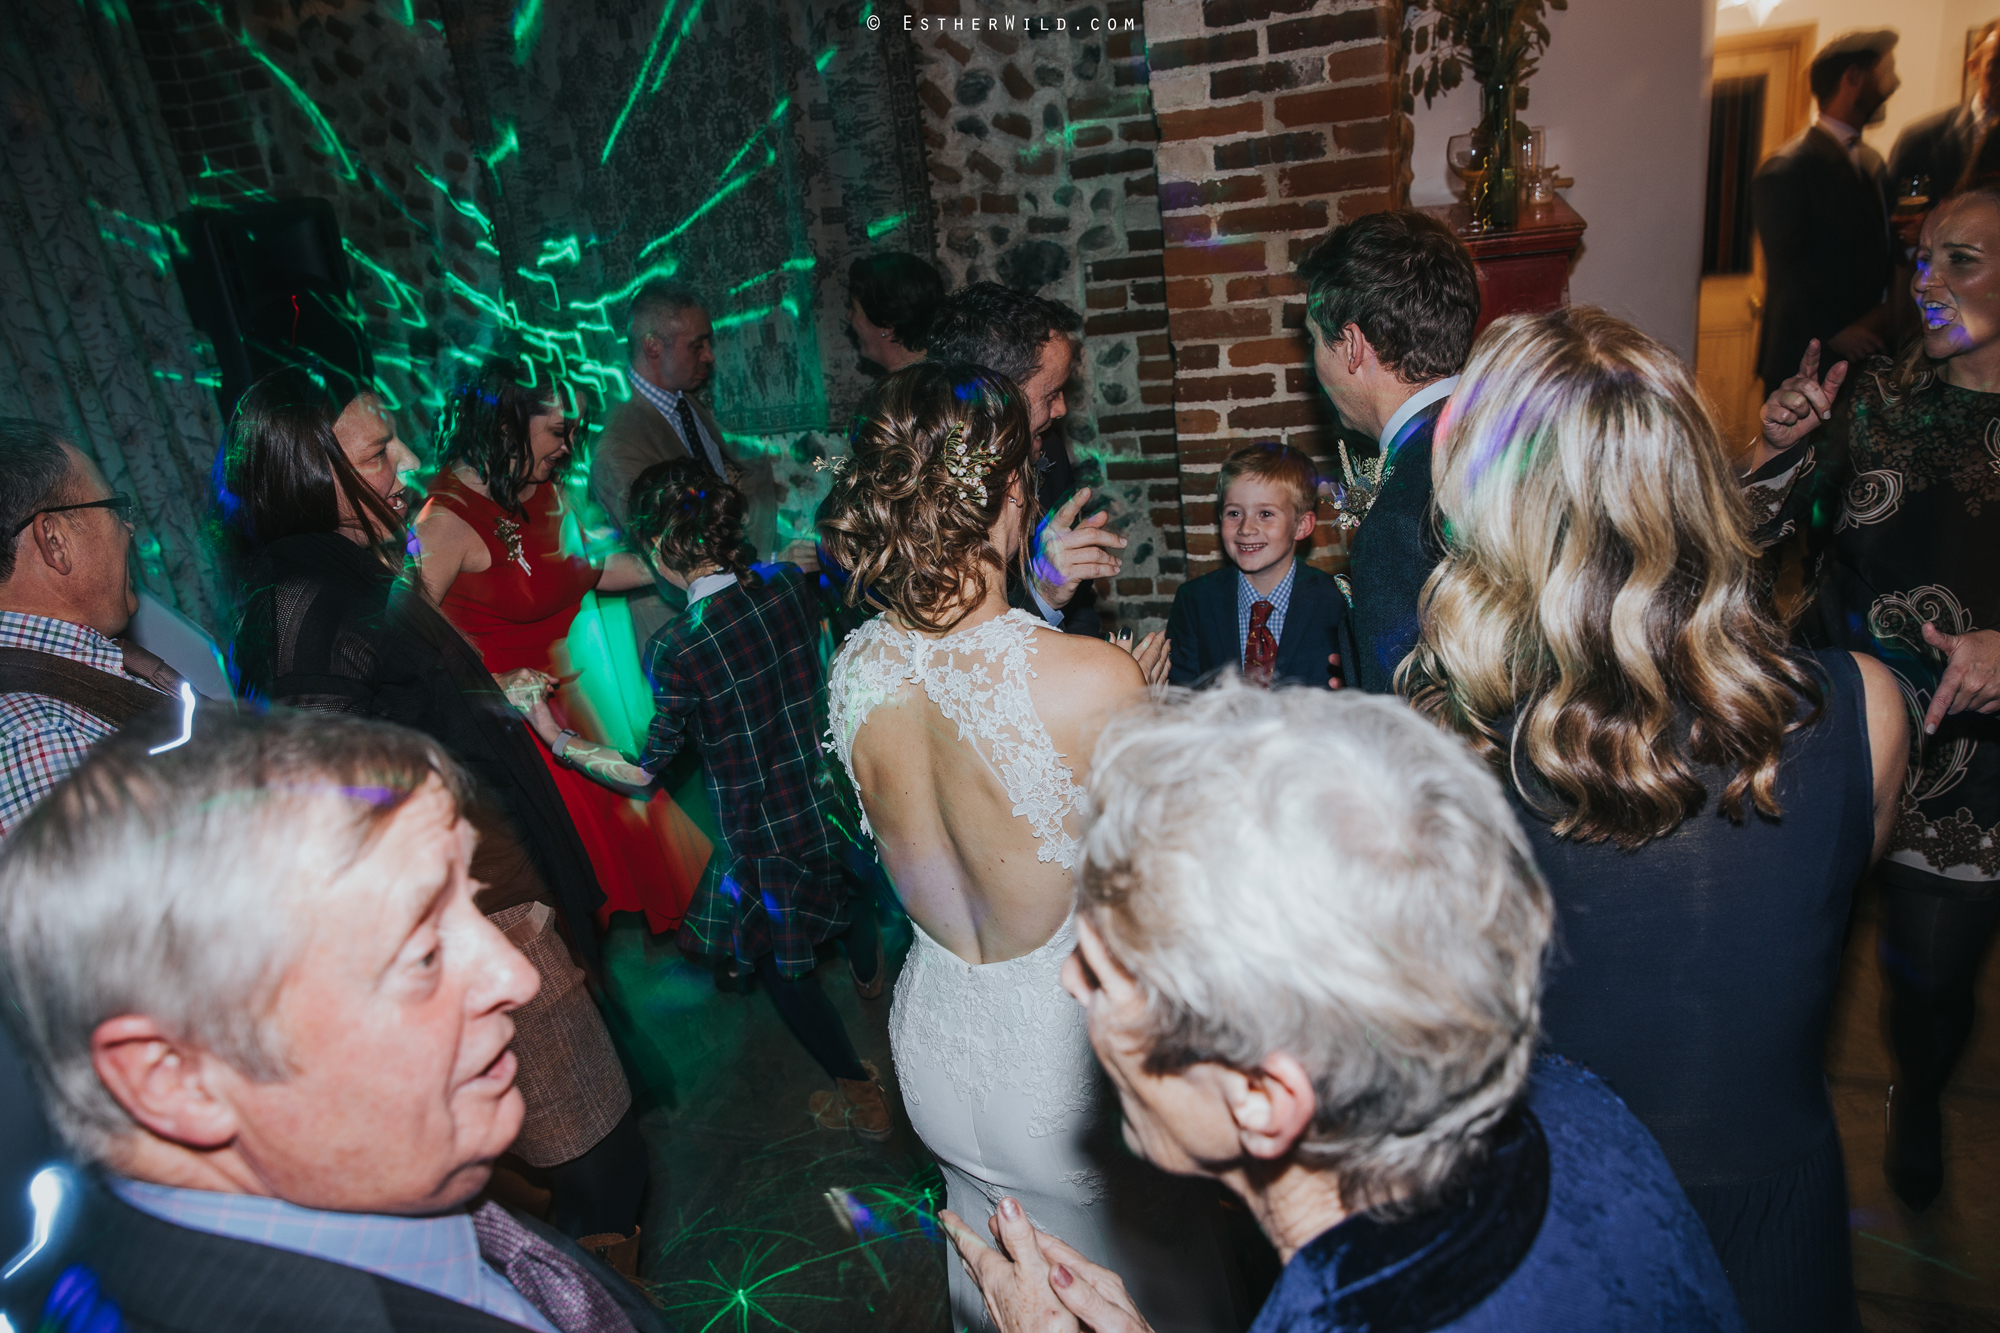 Wedding_Photographer_Chaucer_Barn_Holt_Norfolk_Country_Rustic_Venue_Copyright_Esther_Wild_IMG_2444.jpg